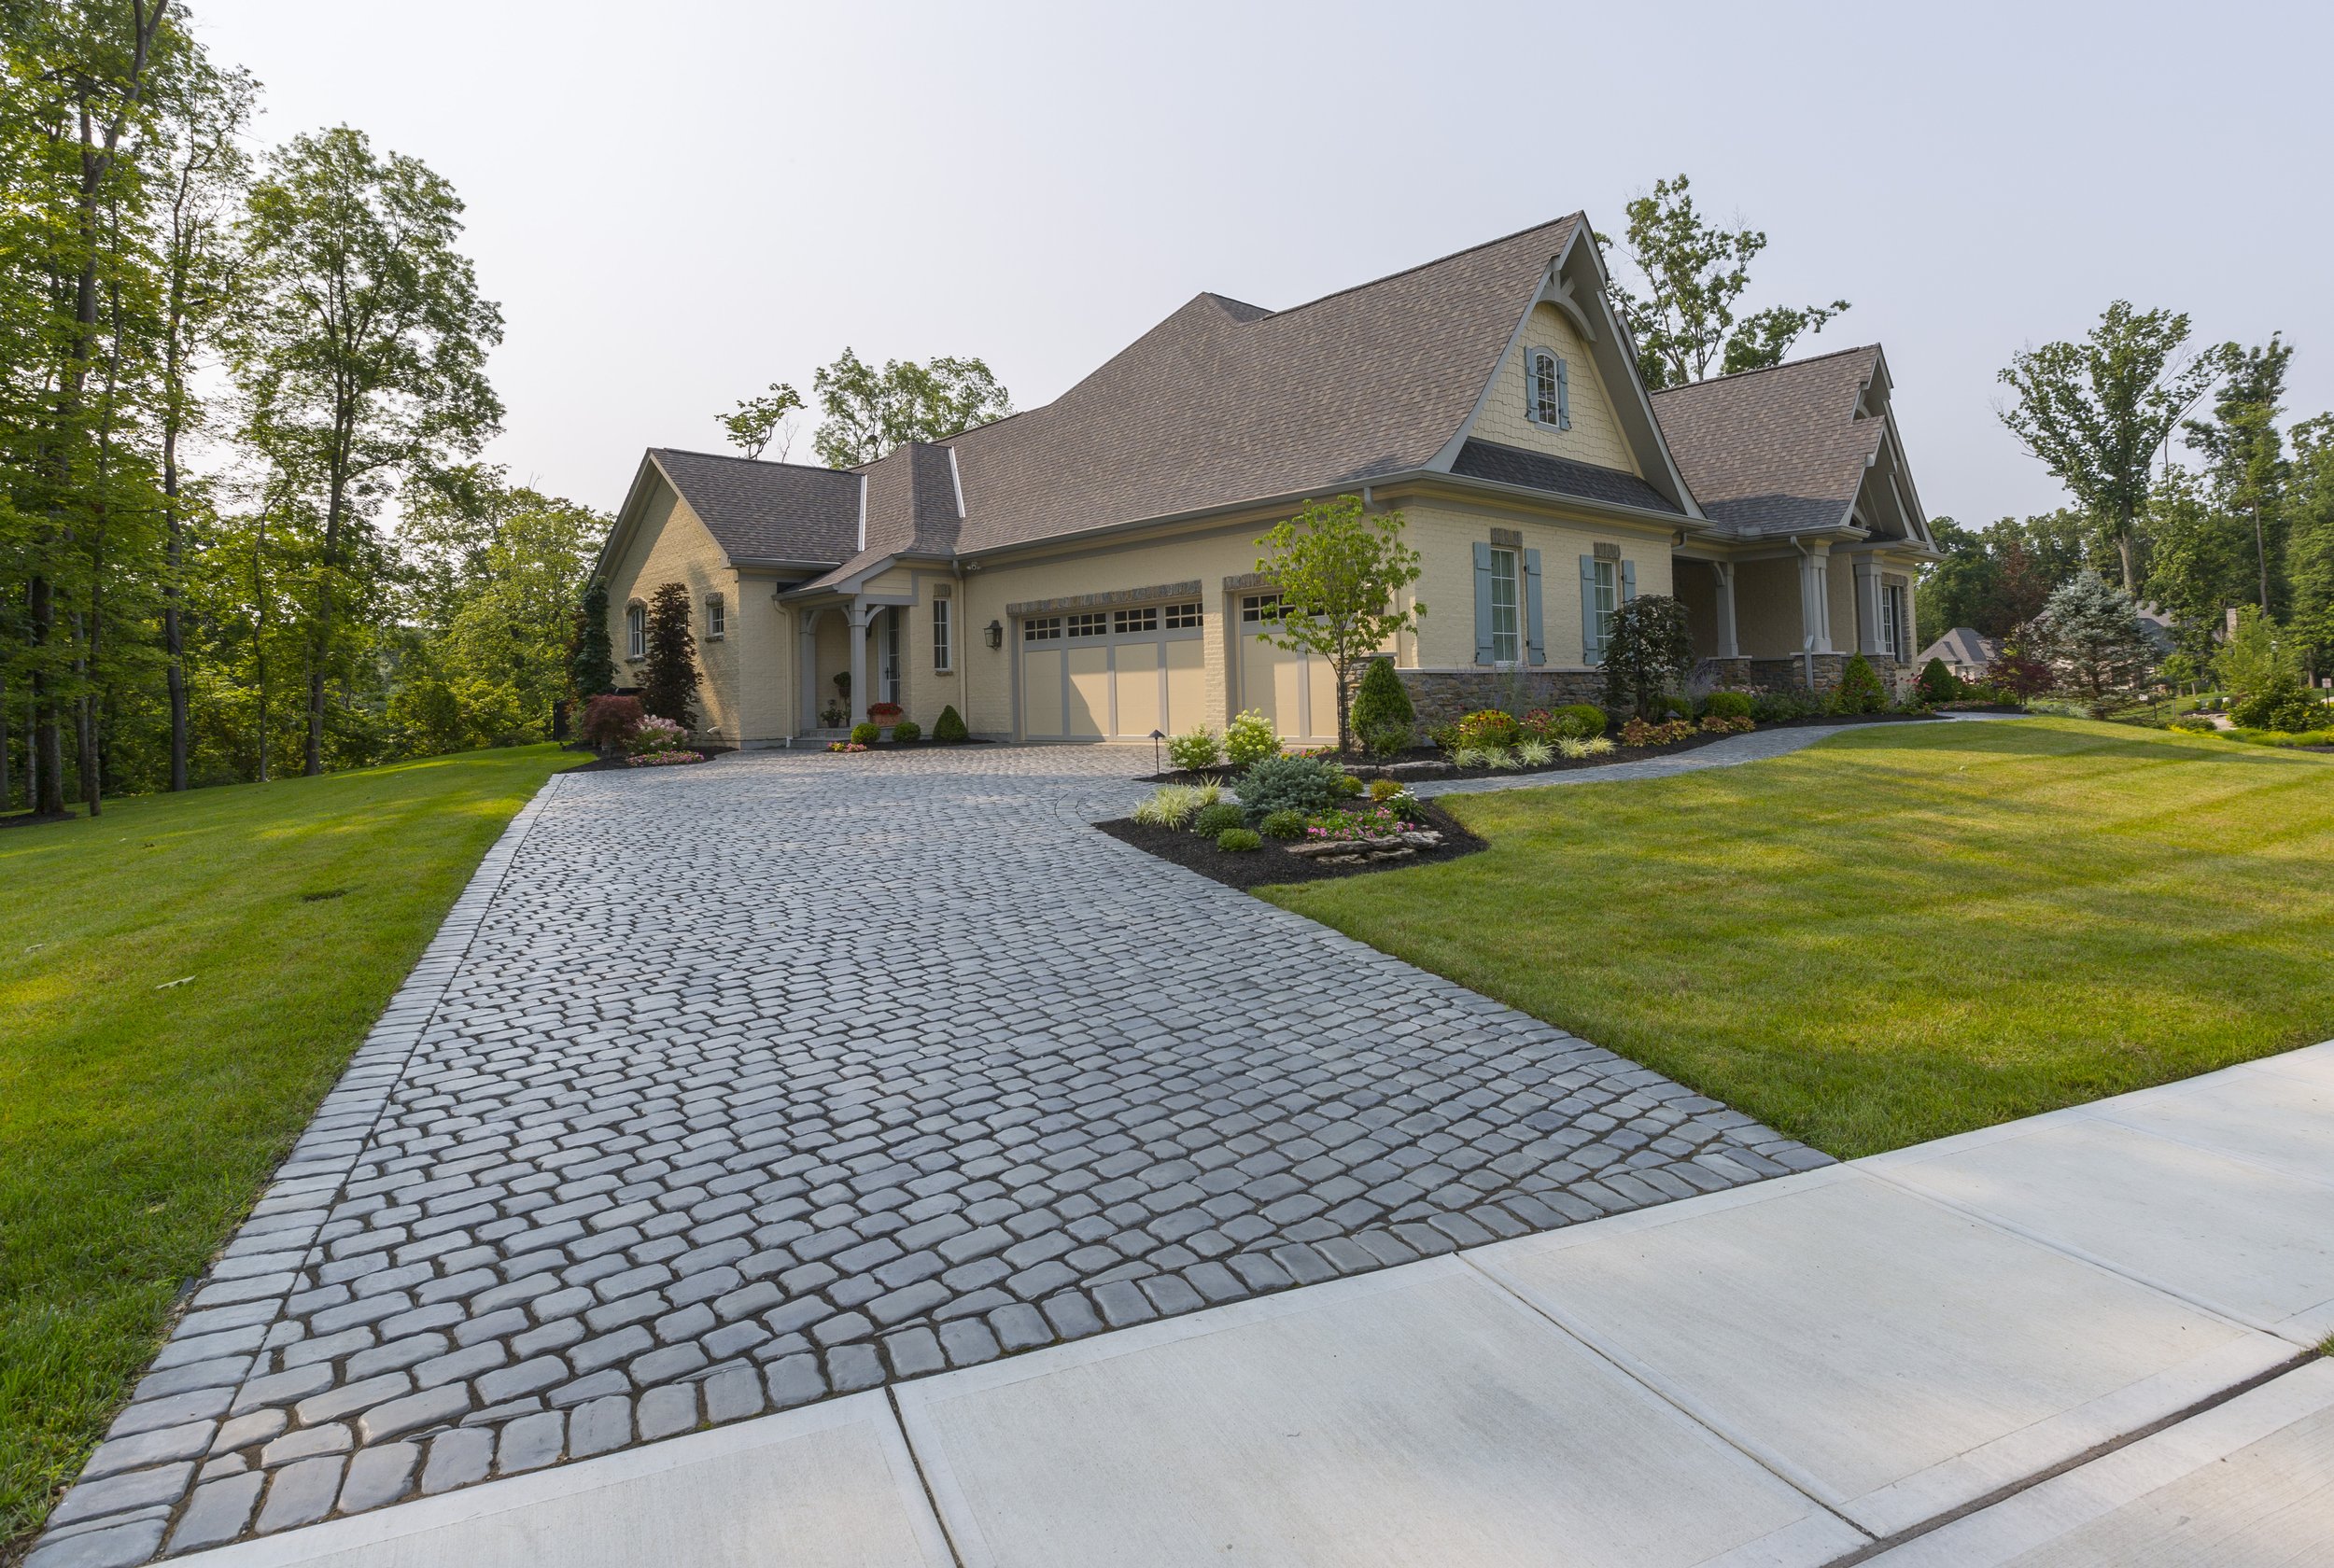 paving-the-way-with-paver-driveways-cincinnati-landscaping